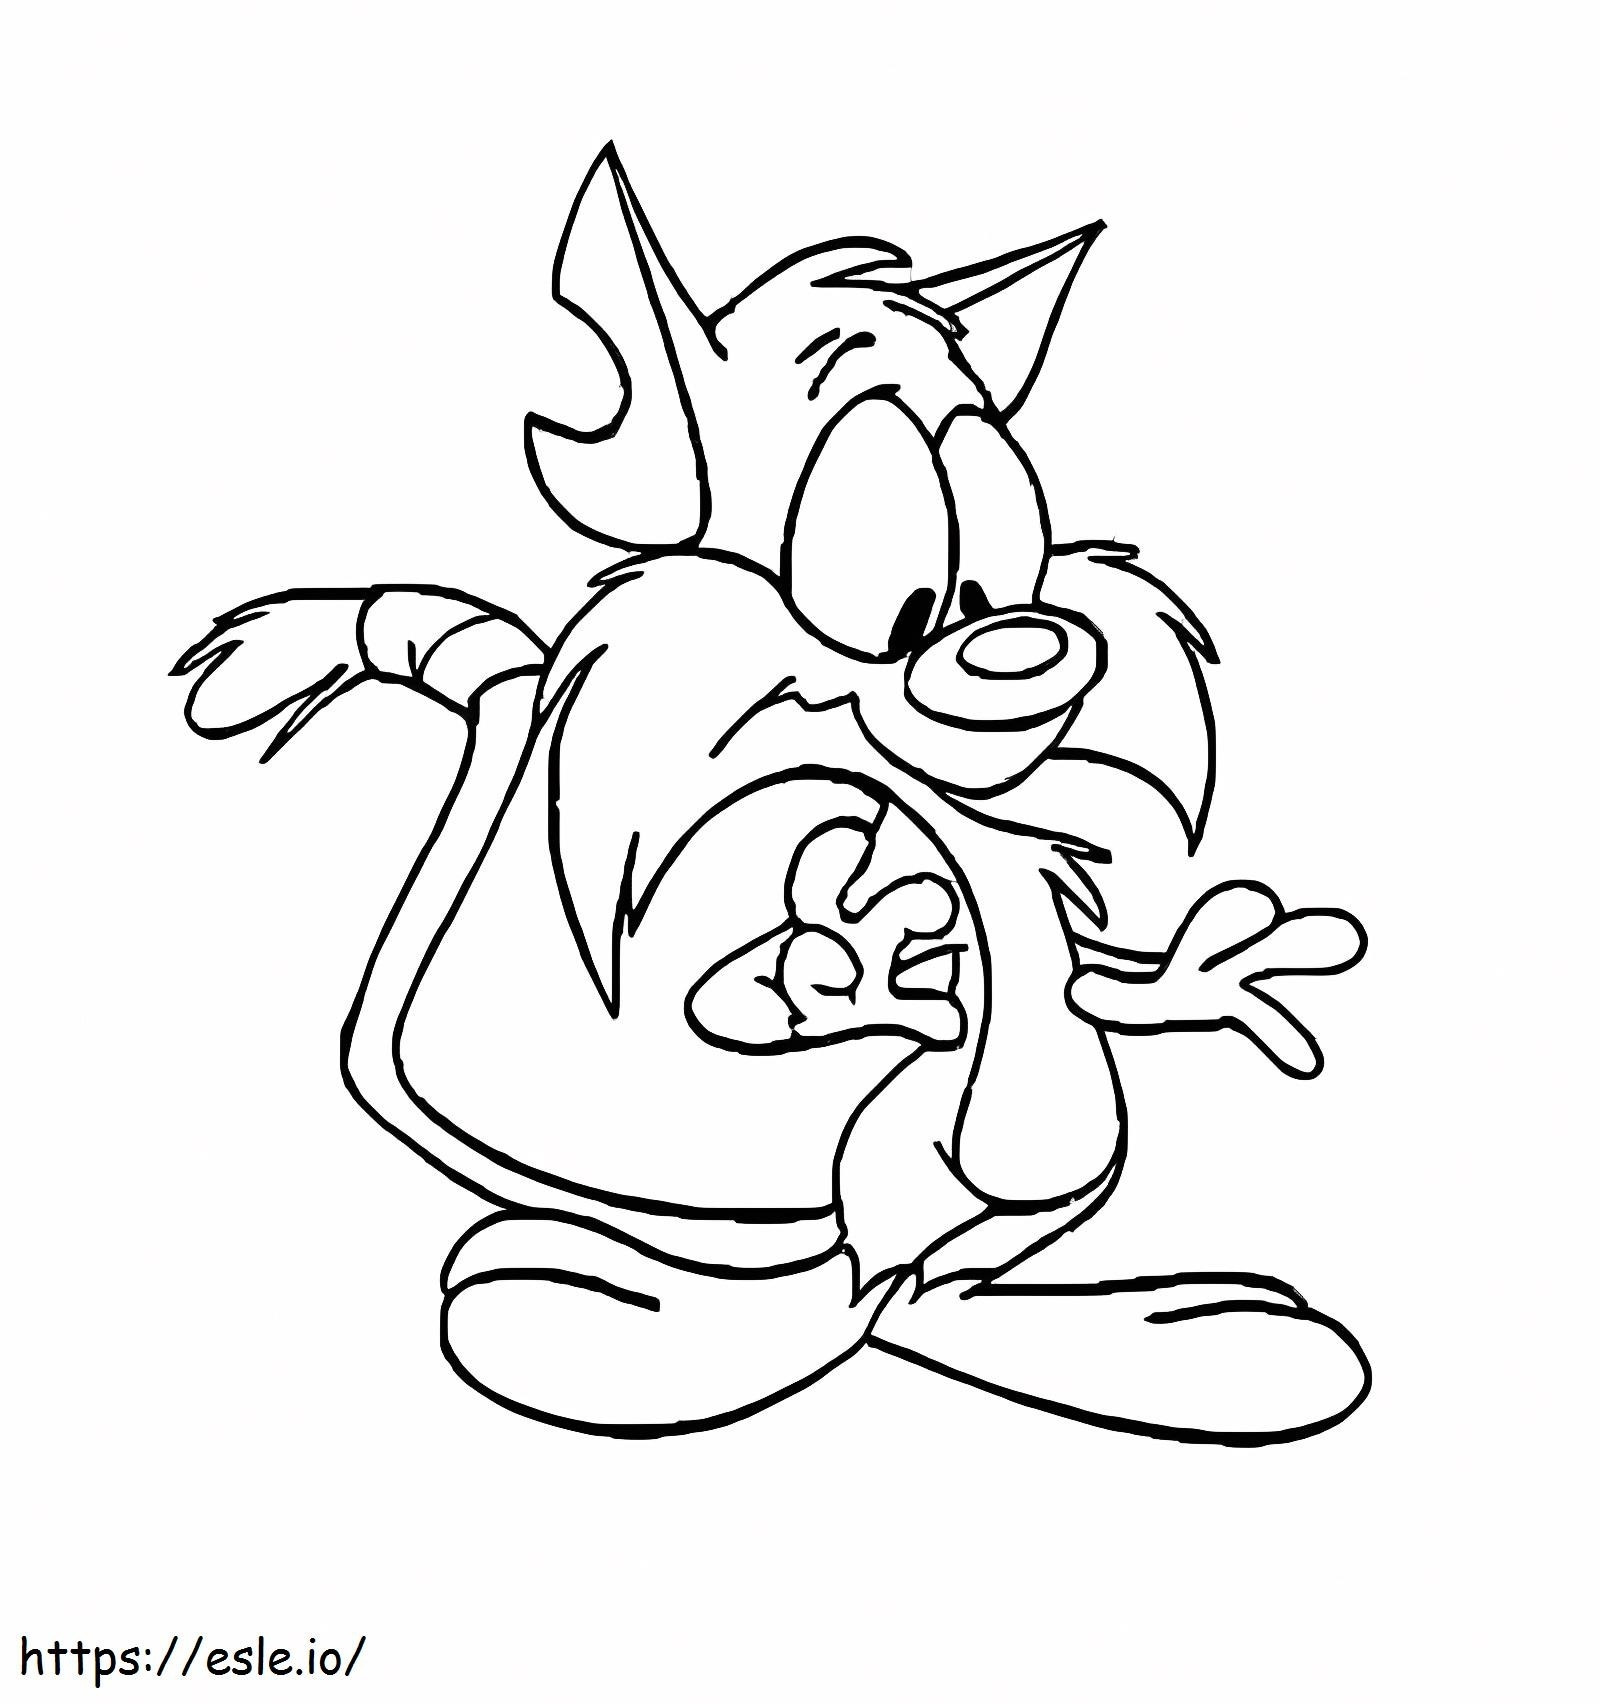 Furrball From Tiny Toon Adventures coloring page